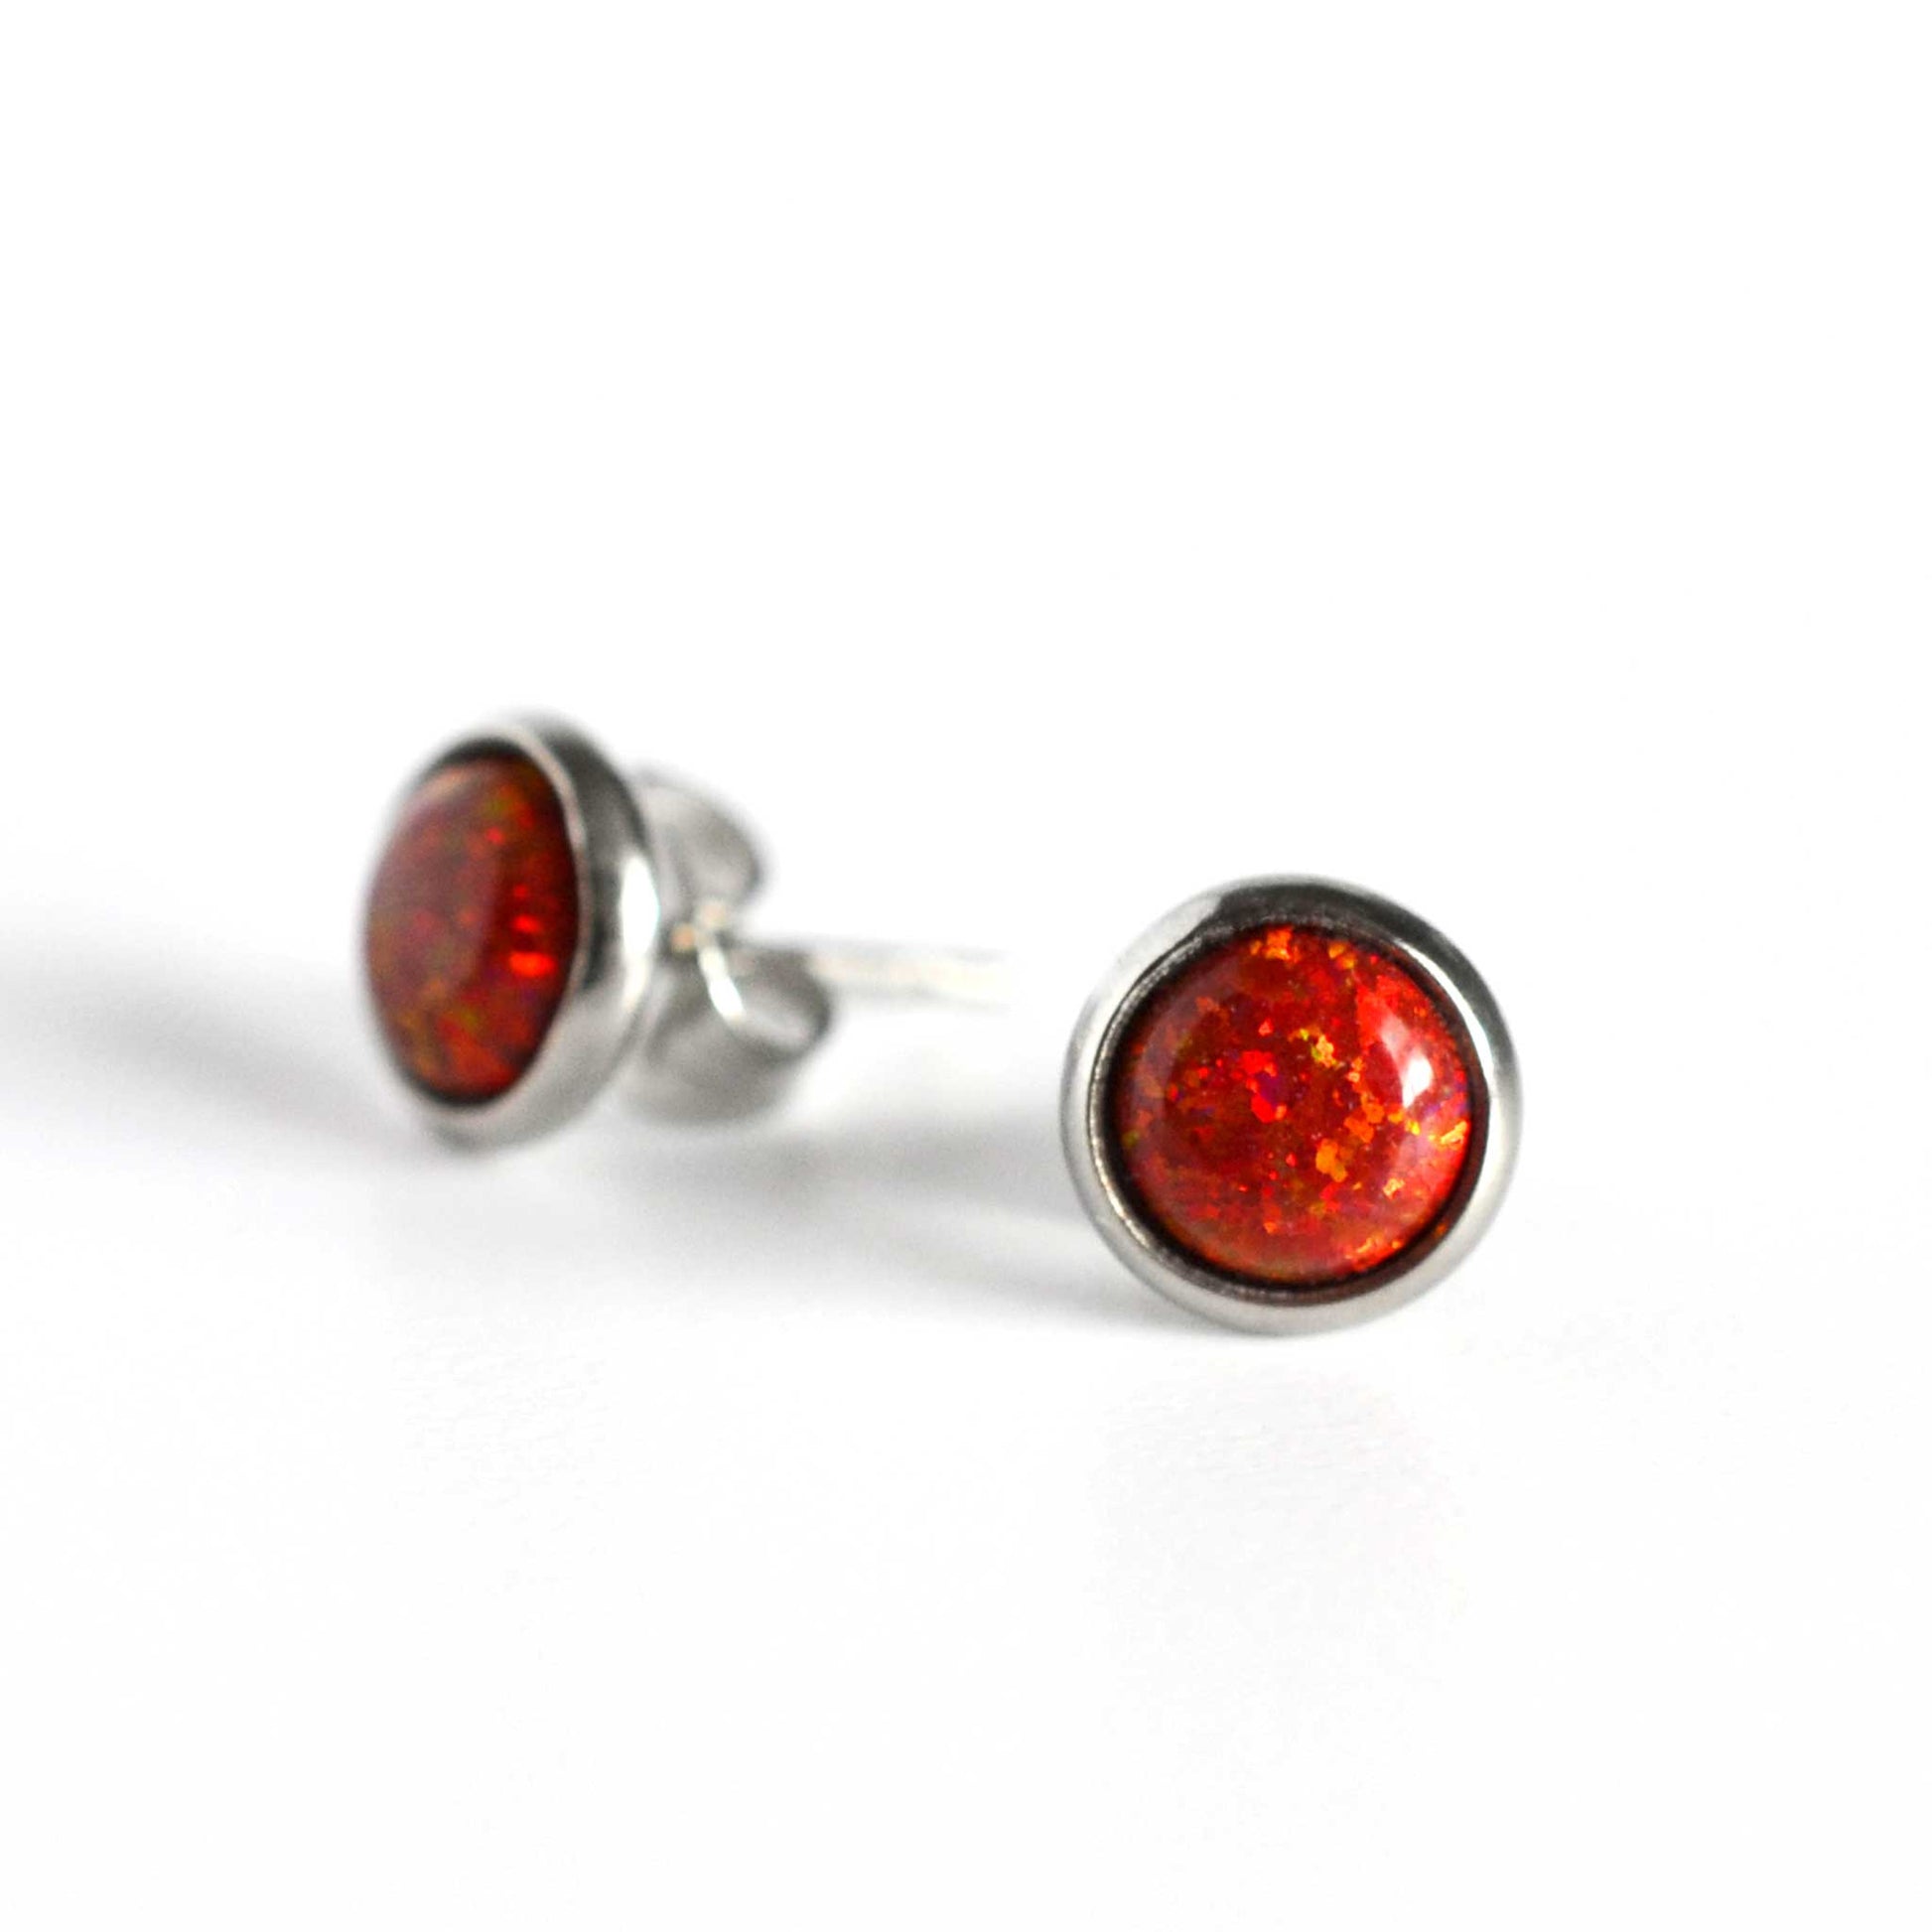 Pair of red Opal stud earrings on white background